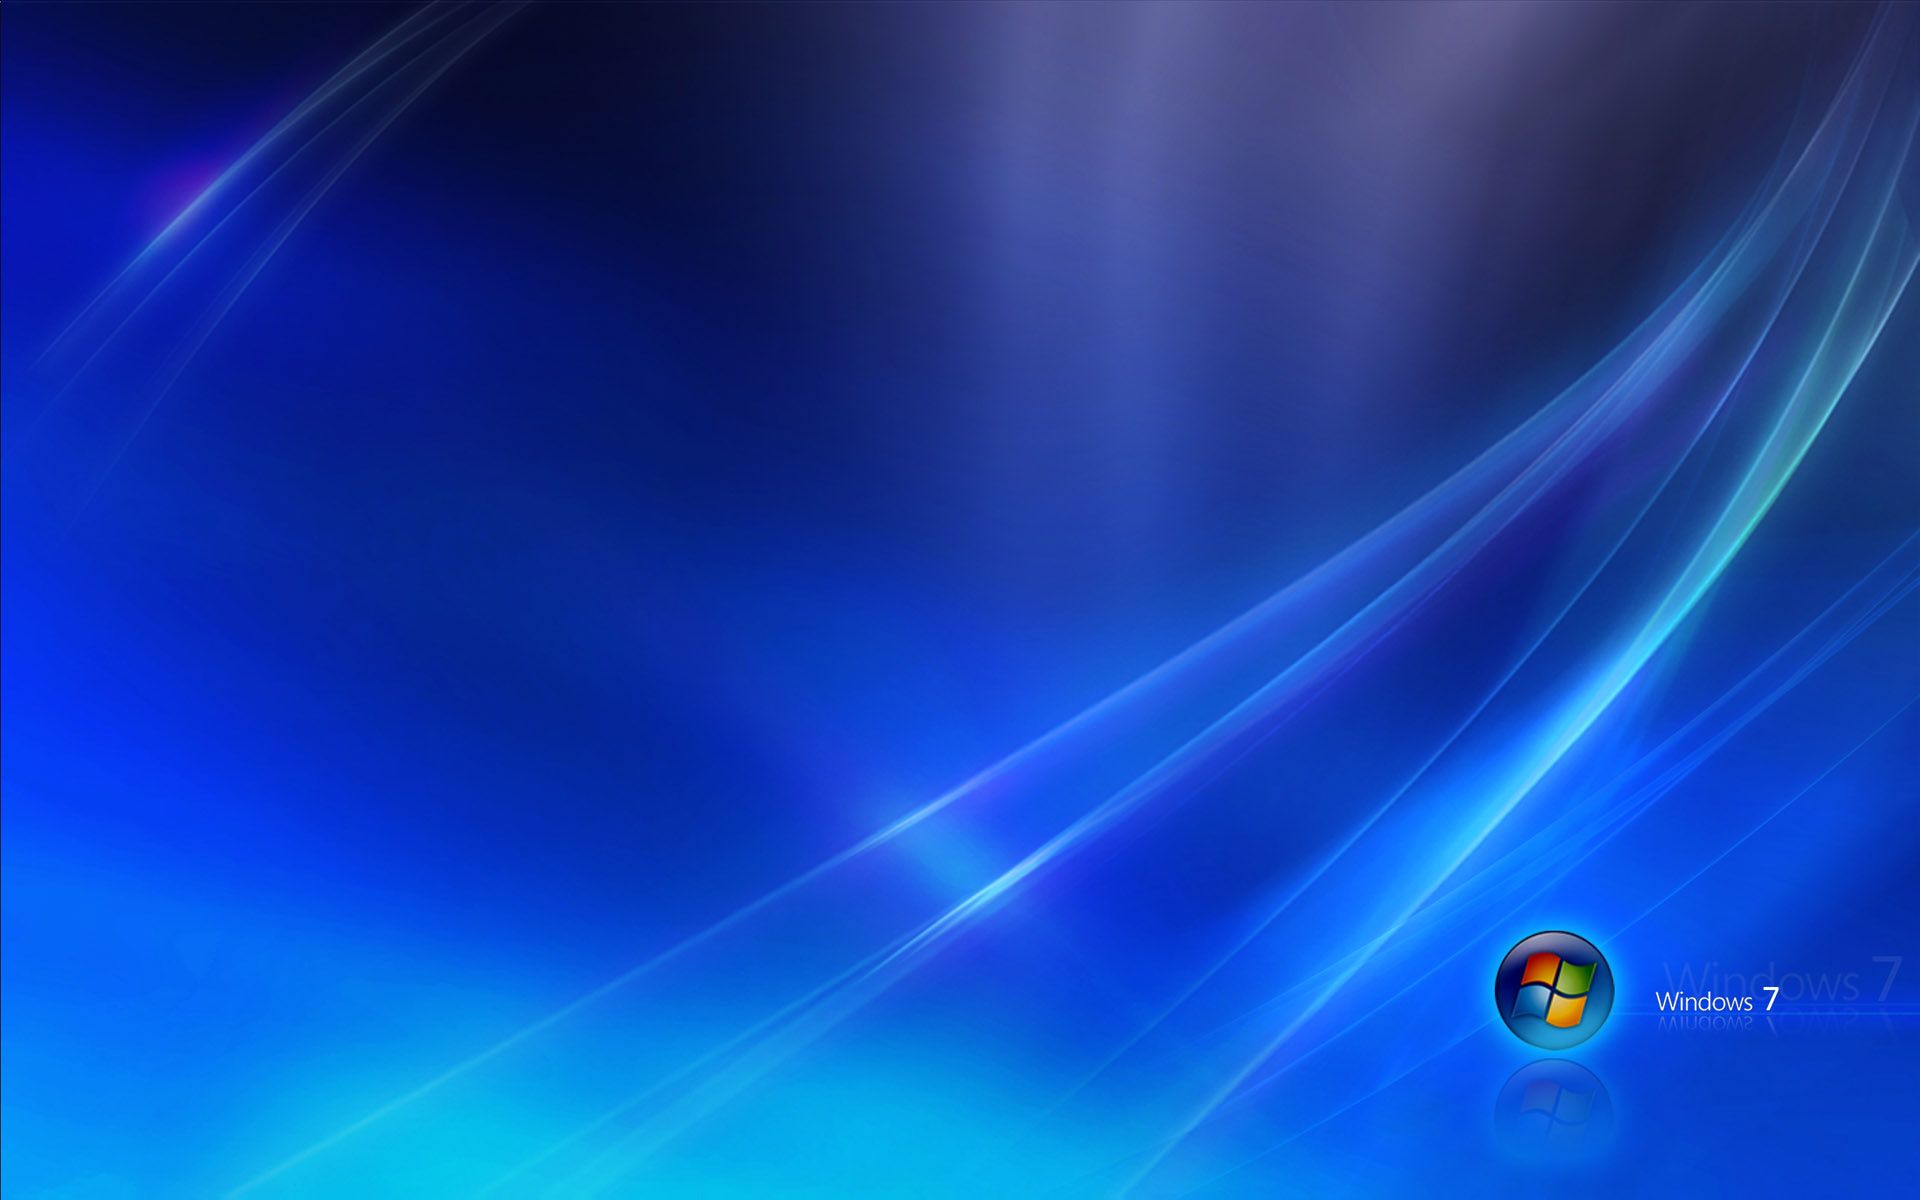 Microsoft Windows Seven wallpapers and images - wallpapers